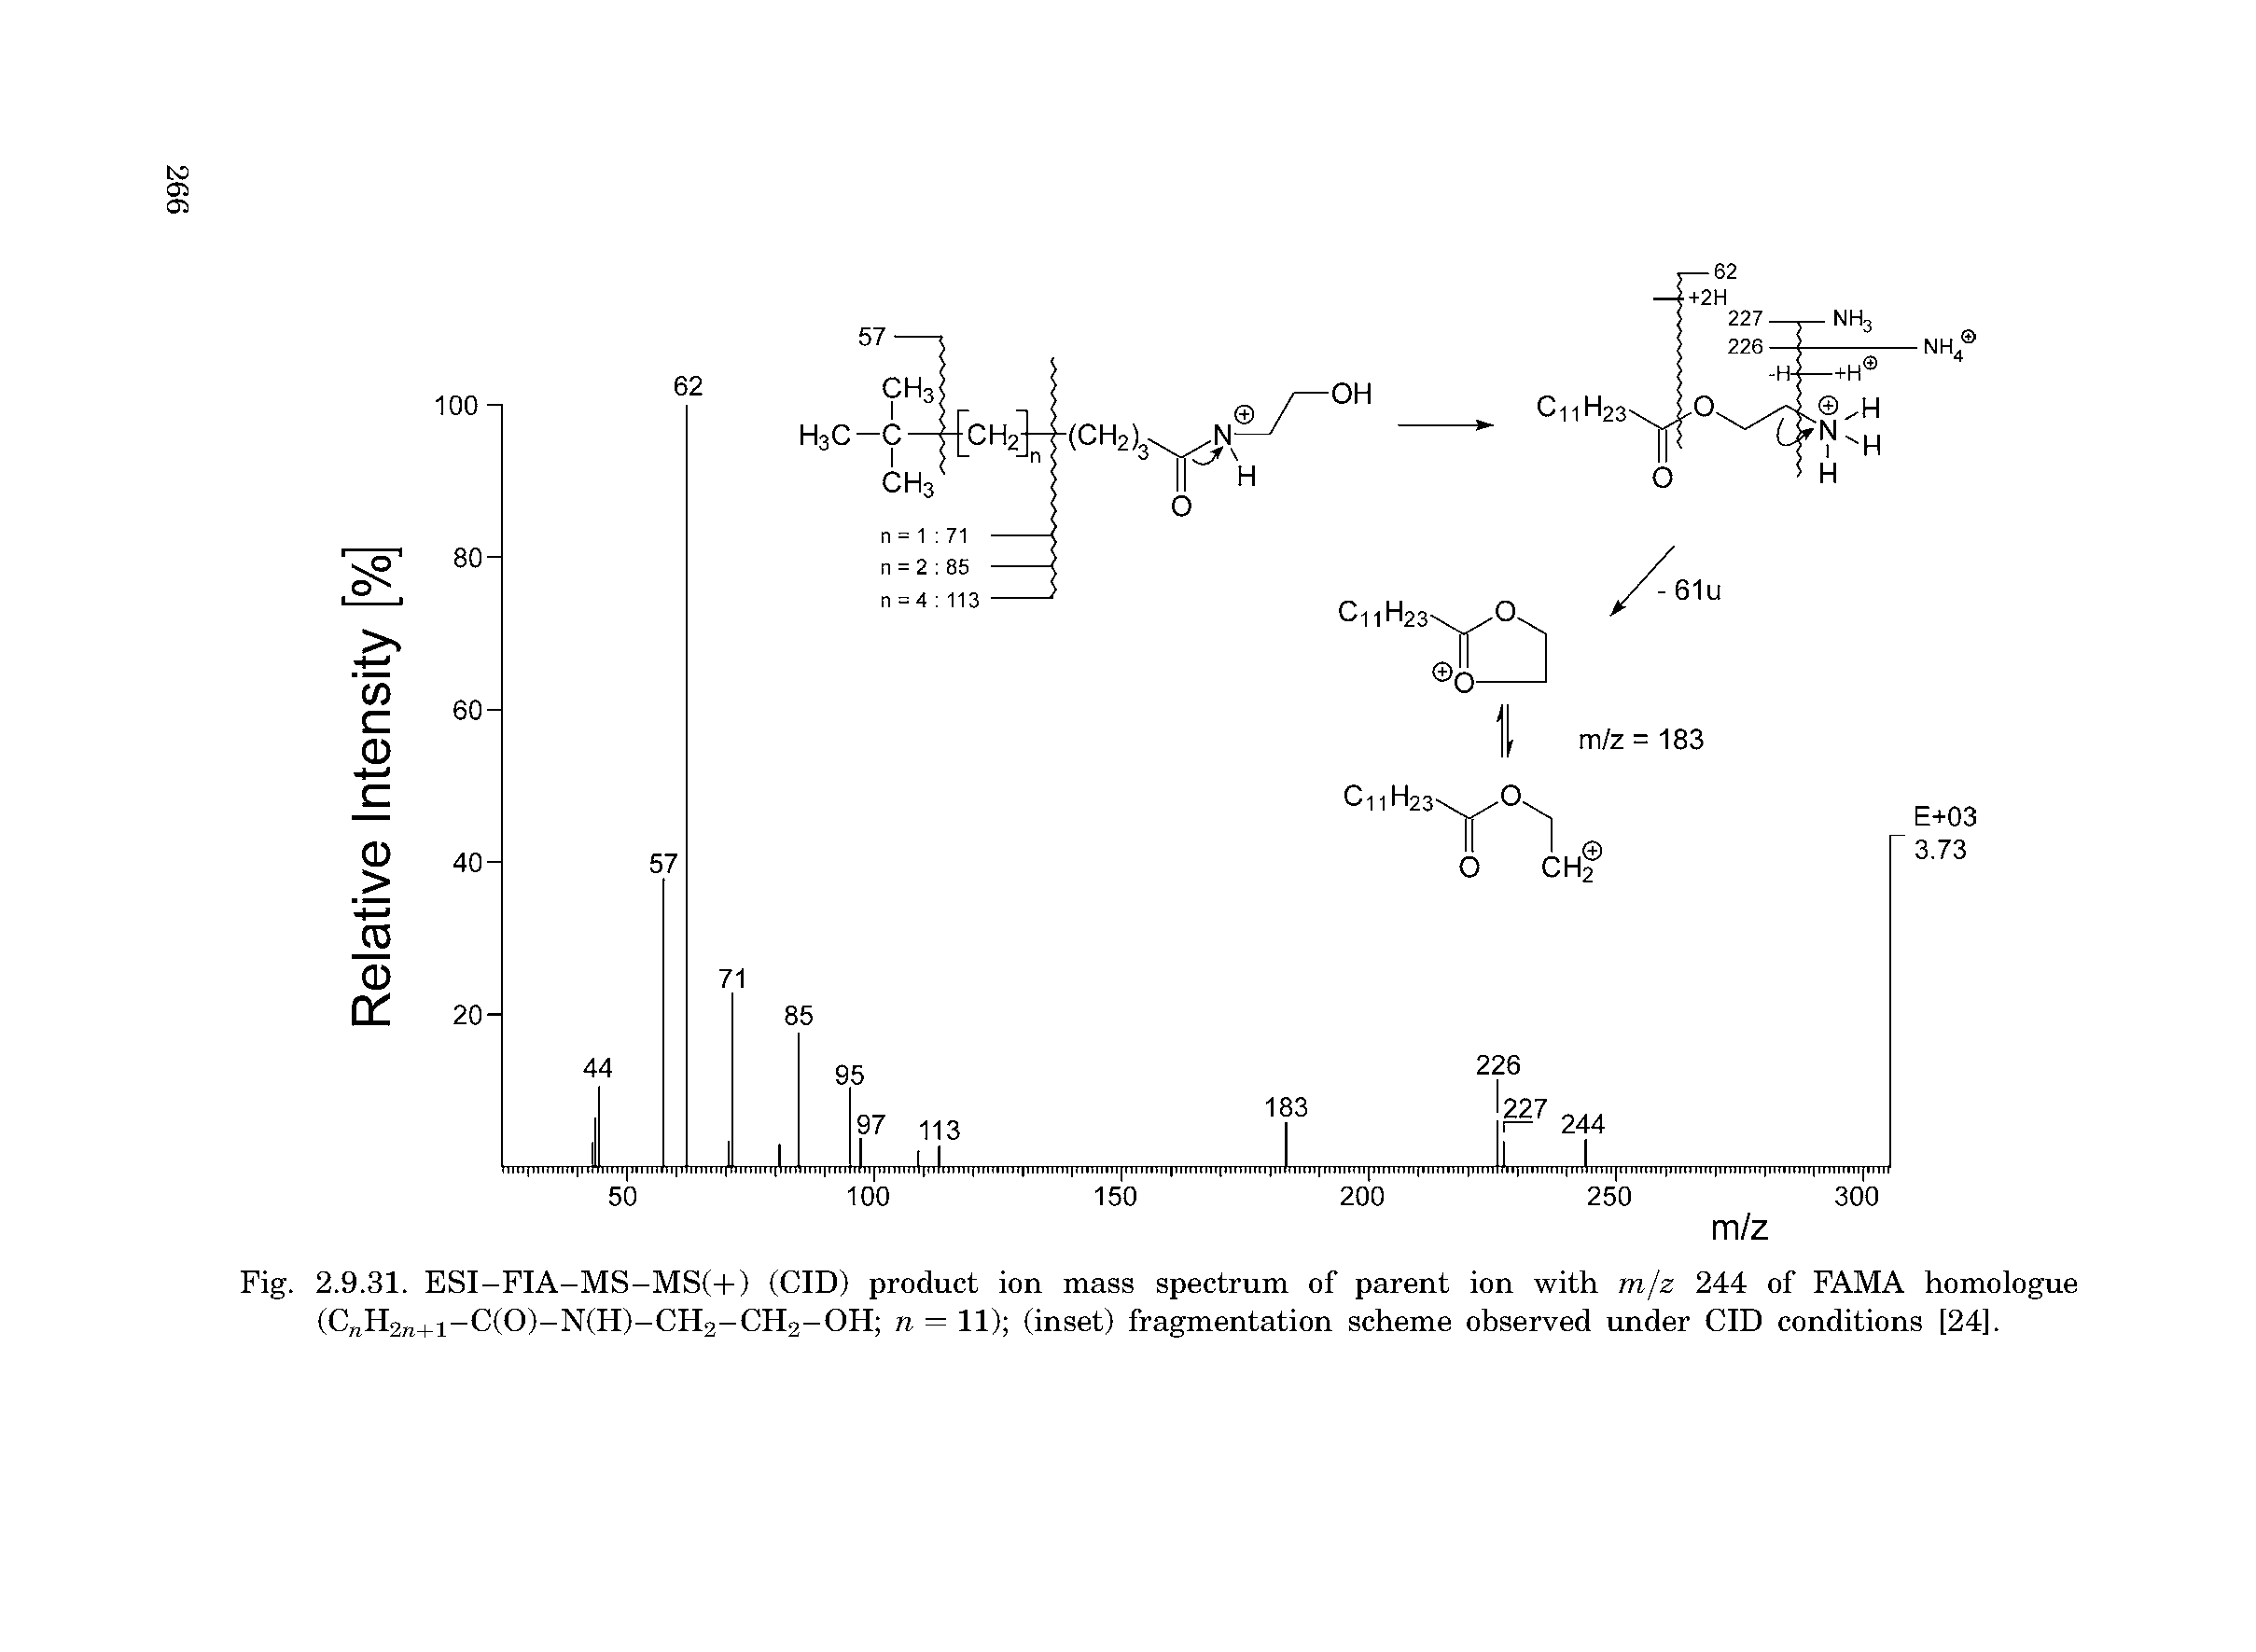 Fig. 2.9.31. ESI-FIA-MS-MS(+) (CID) product ion mass spectrum of parent ion with m/z 244 of FAMA homologue (C H2 +1-C(0)-N(H)-CH2-CH2-0H n = 11) (inset) fragmentation scheme observed under CID conditions [24].